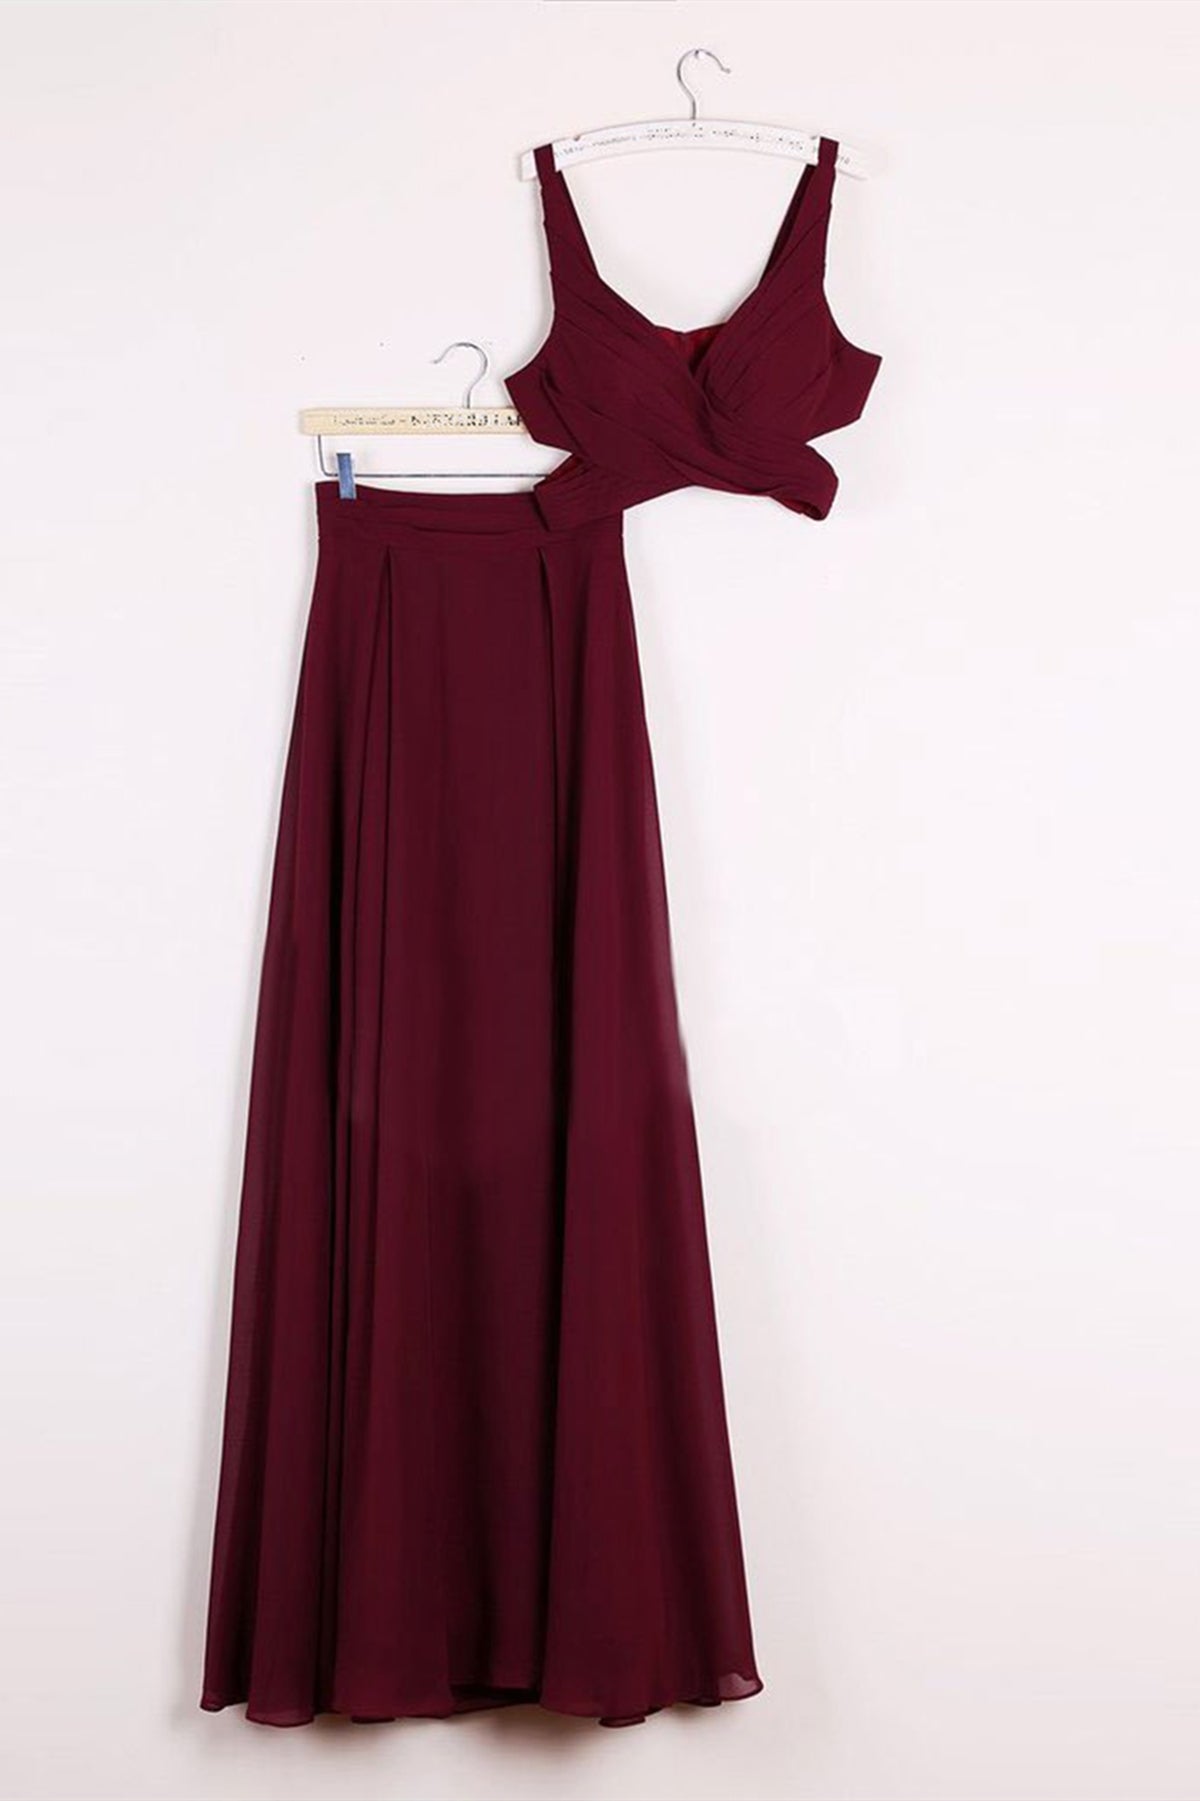 Two Pieces Burgundy Long Prom Dresses, Dark Red 2 Pieces Long Formal Bridesmaid Dresses